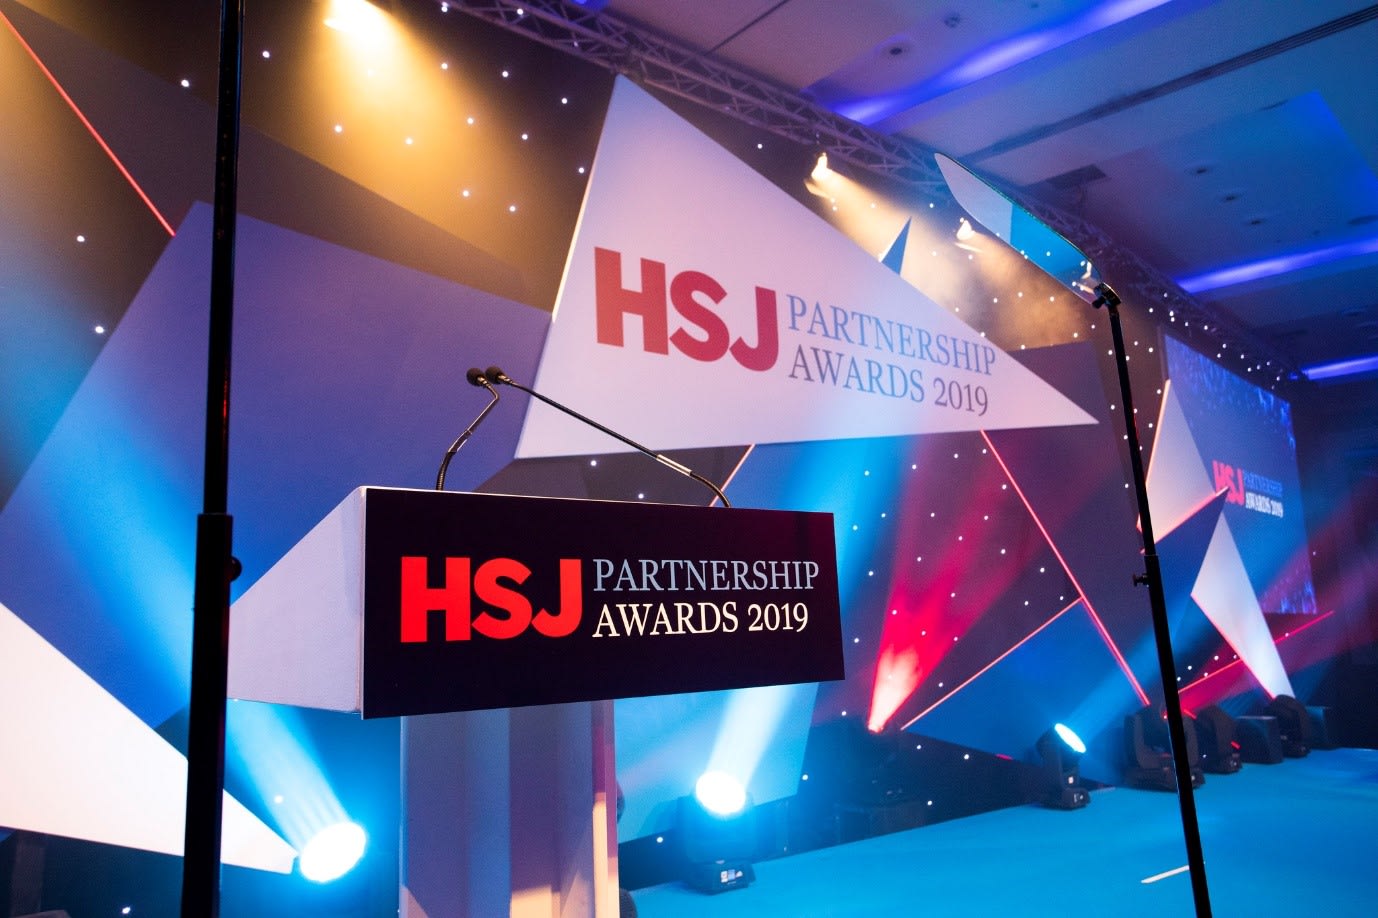 Black Country Pathology with LTS Health receives High Commendation at the 2019 HSJ Partnership Awards